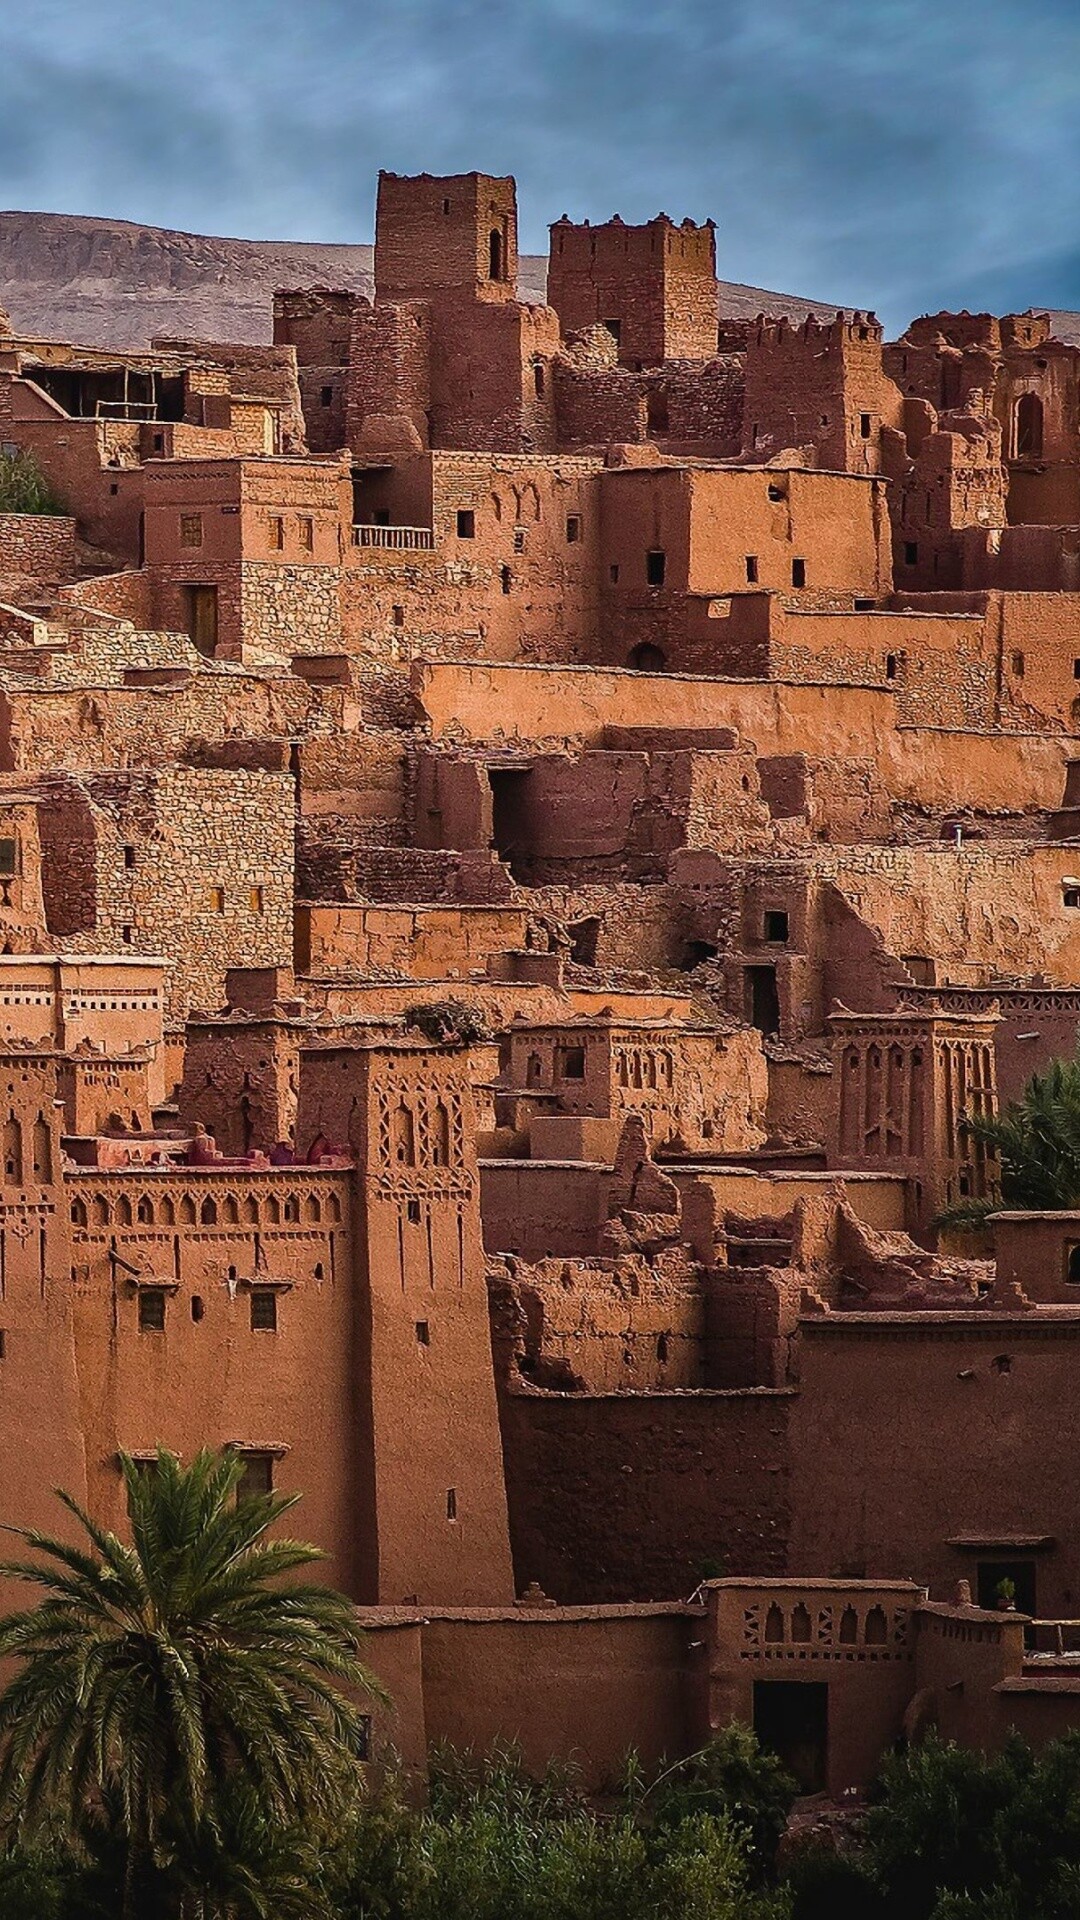 Morocco: Ksar Ait Ben Haddou‌, Mountainous country of western North Africa. 1080x1920 Full HD Wallpaper.